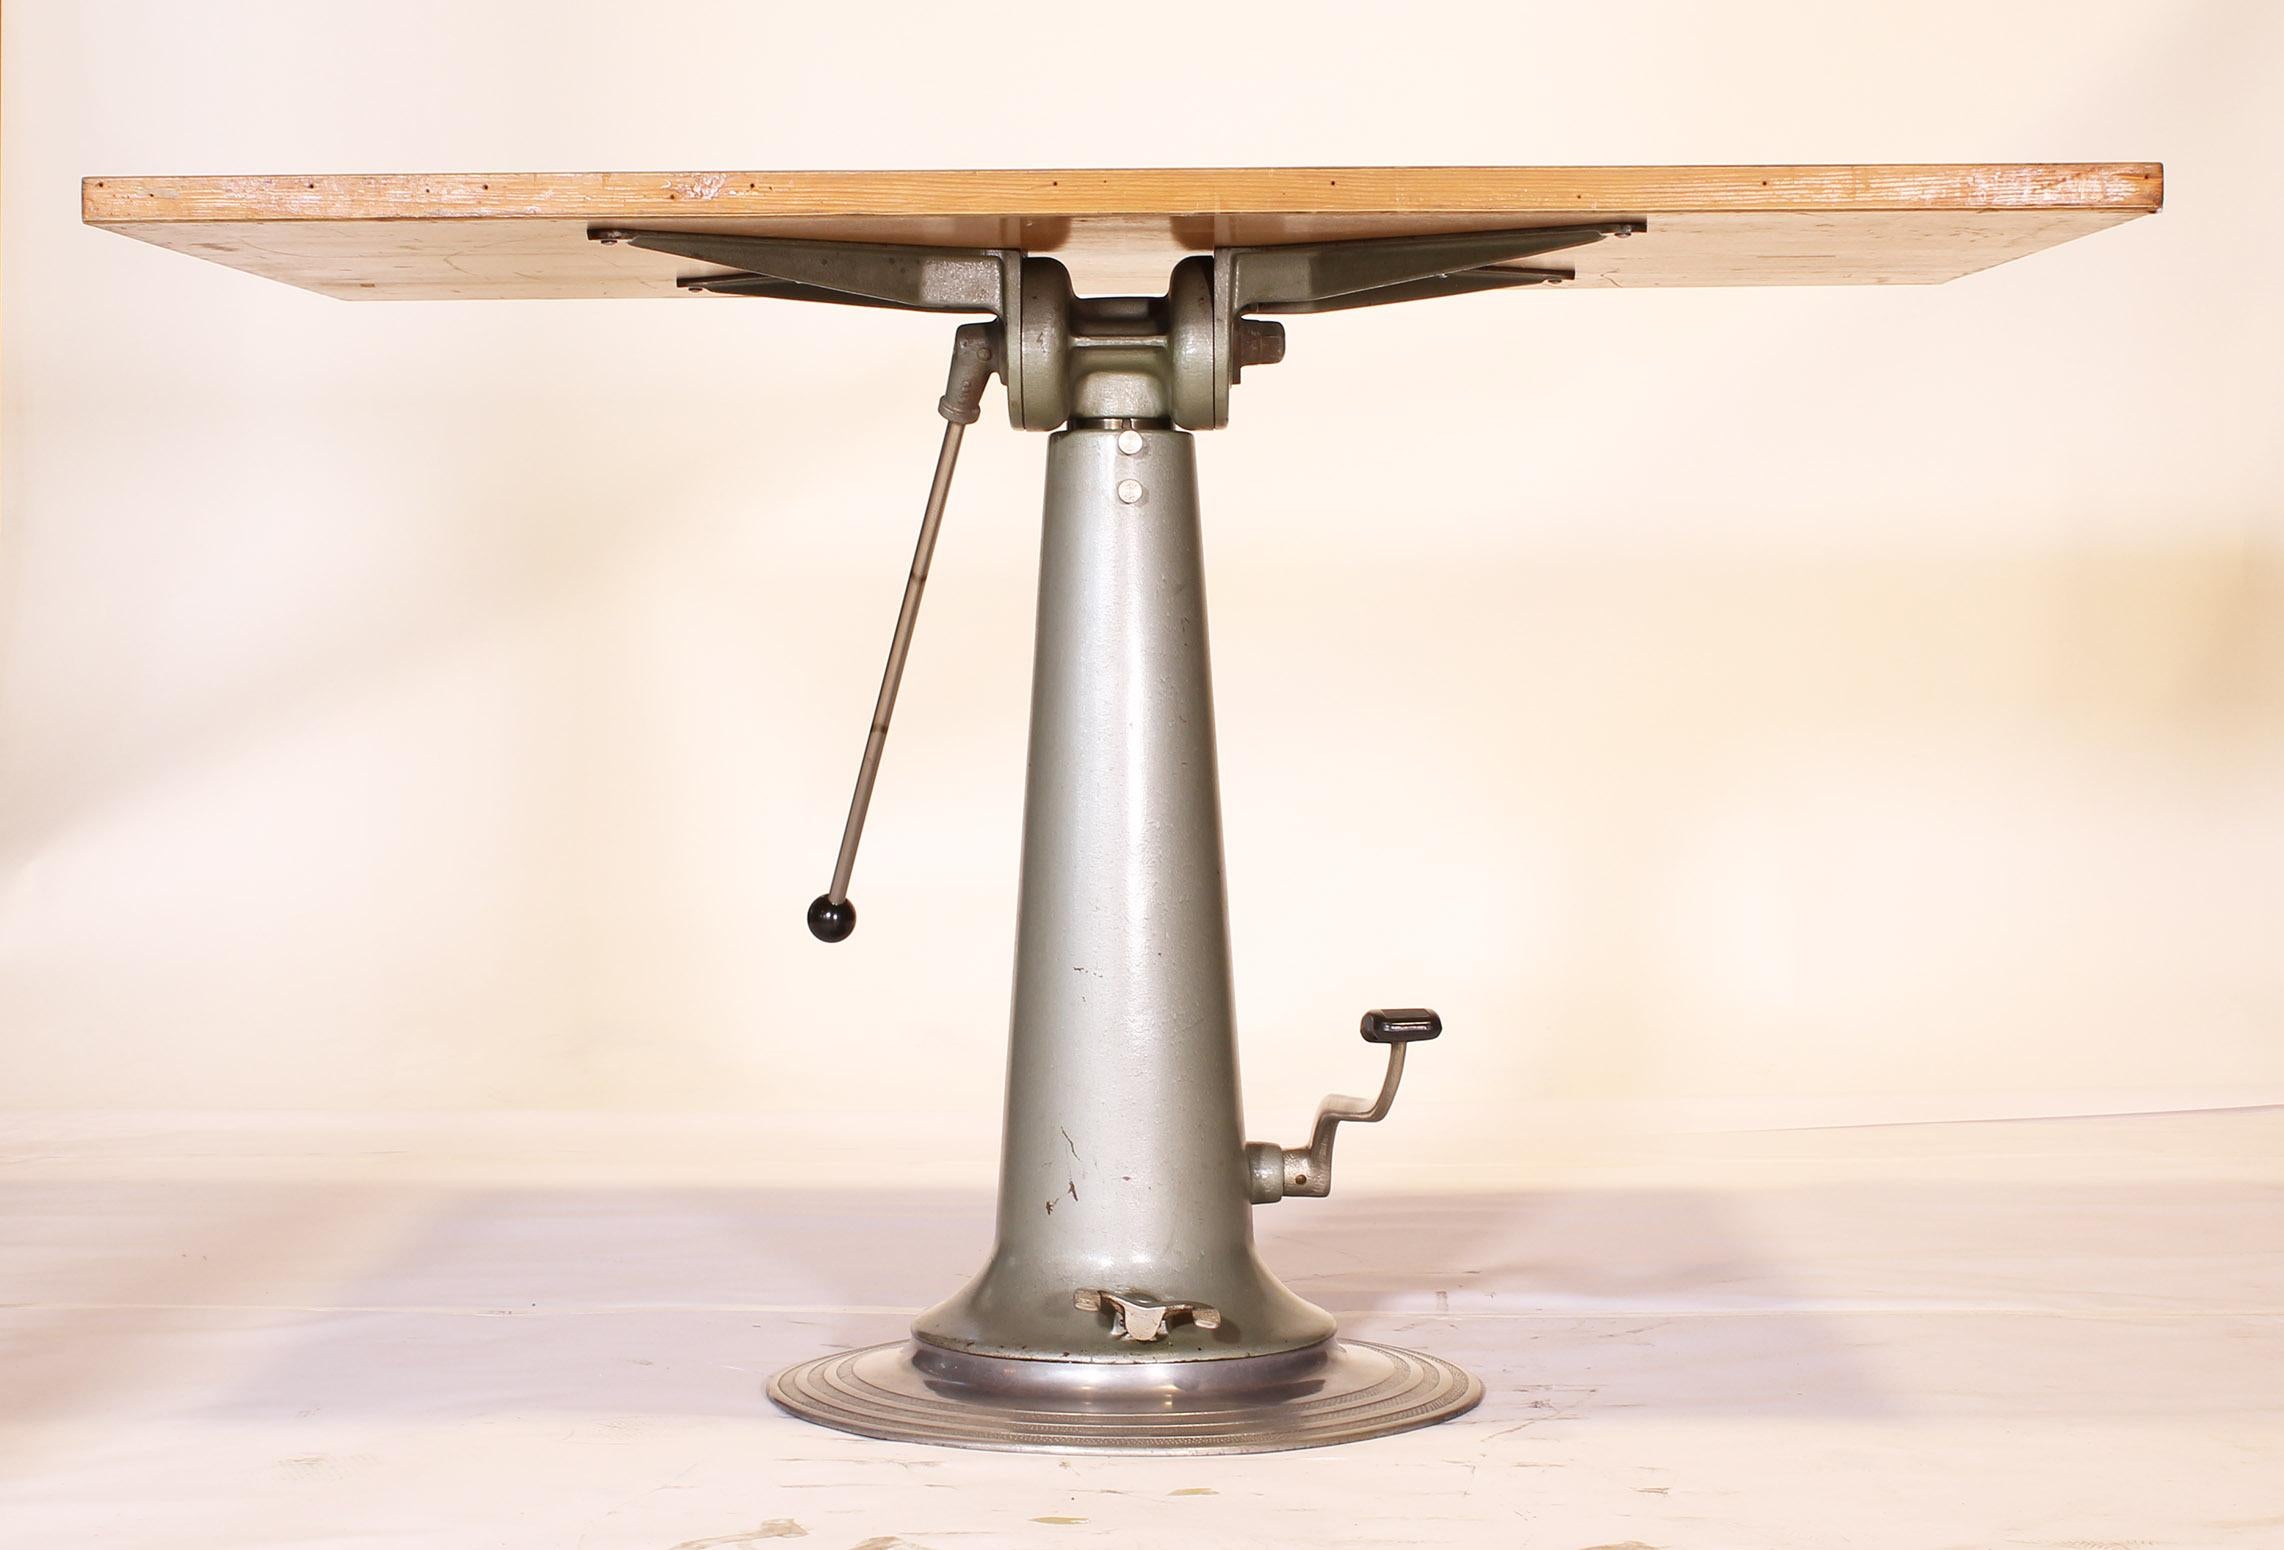 20th Century Industrial Drafting Table by Nike, Tall Model